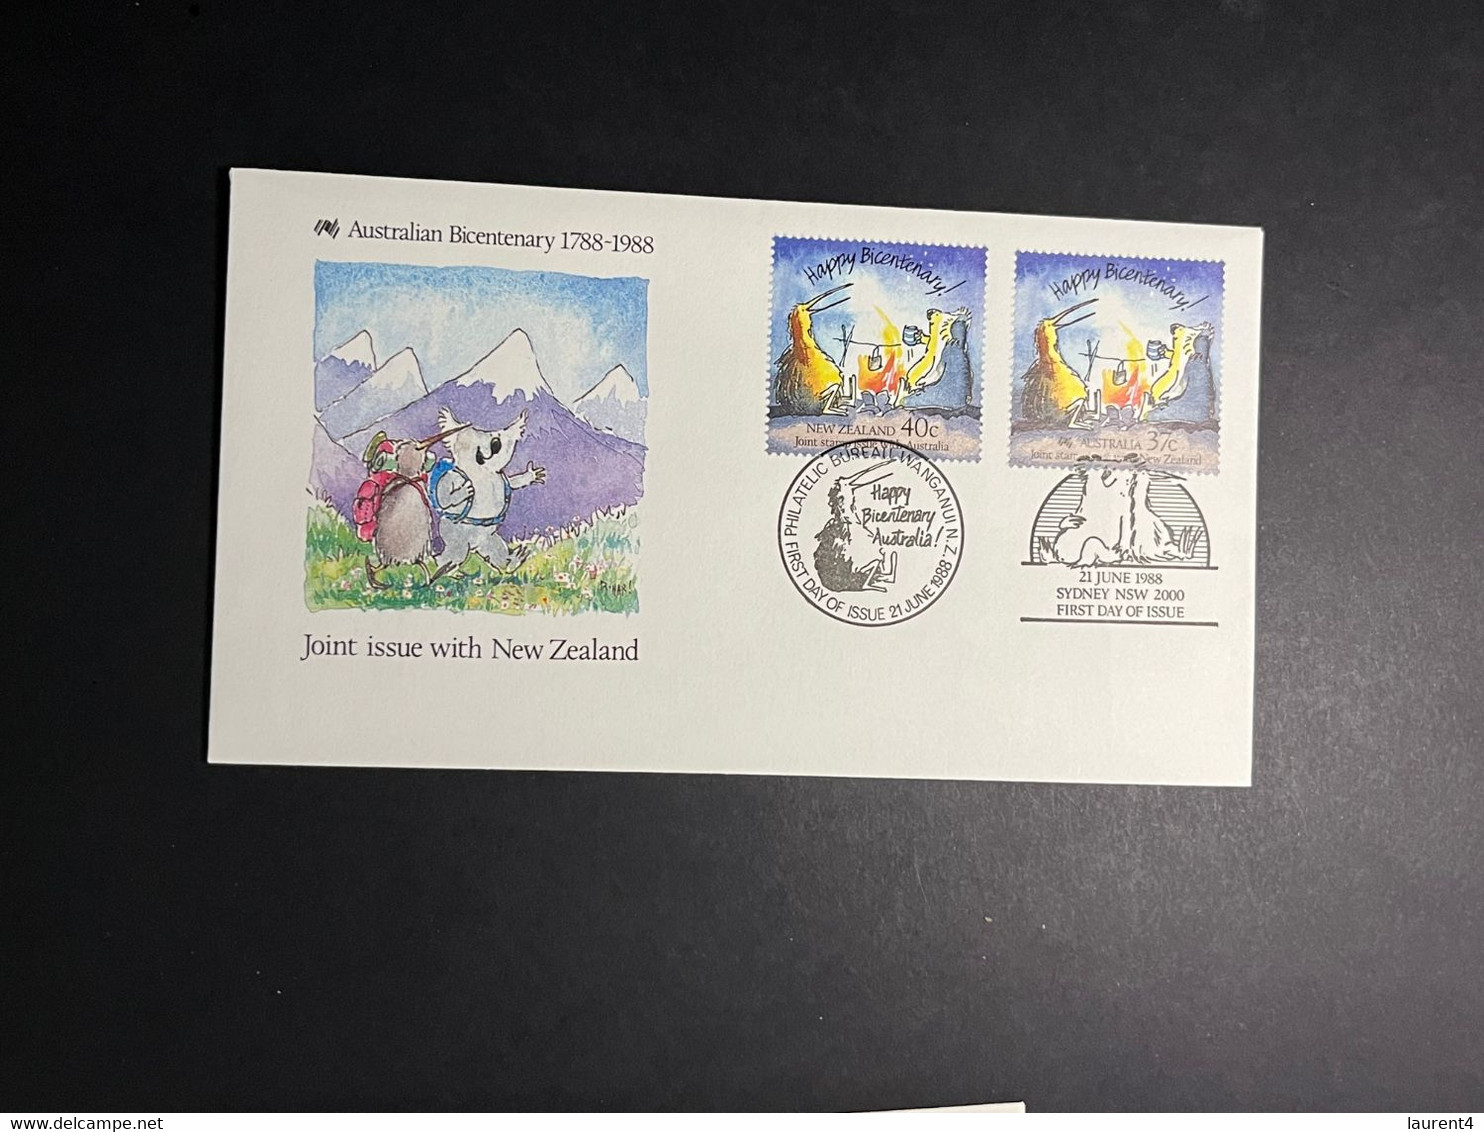 (1 P 4) New Zealand FDC - Joint Issue With Australia - 1988 - FDC